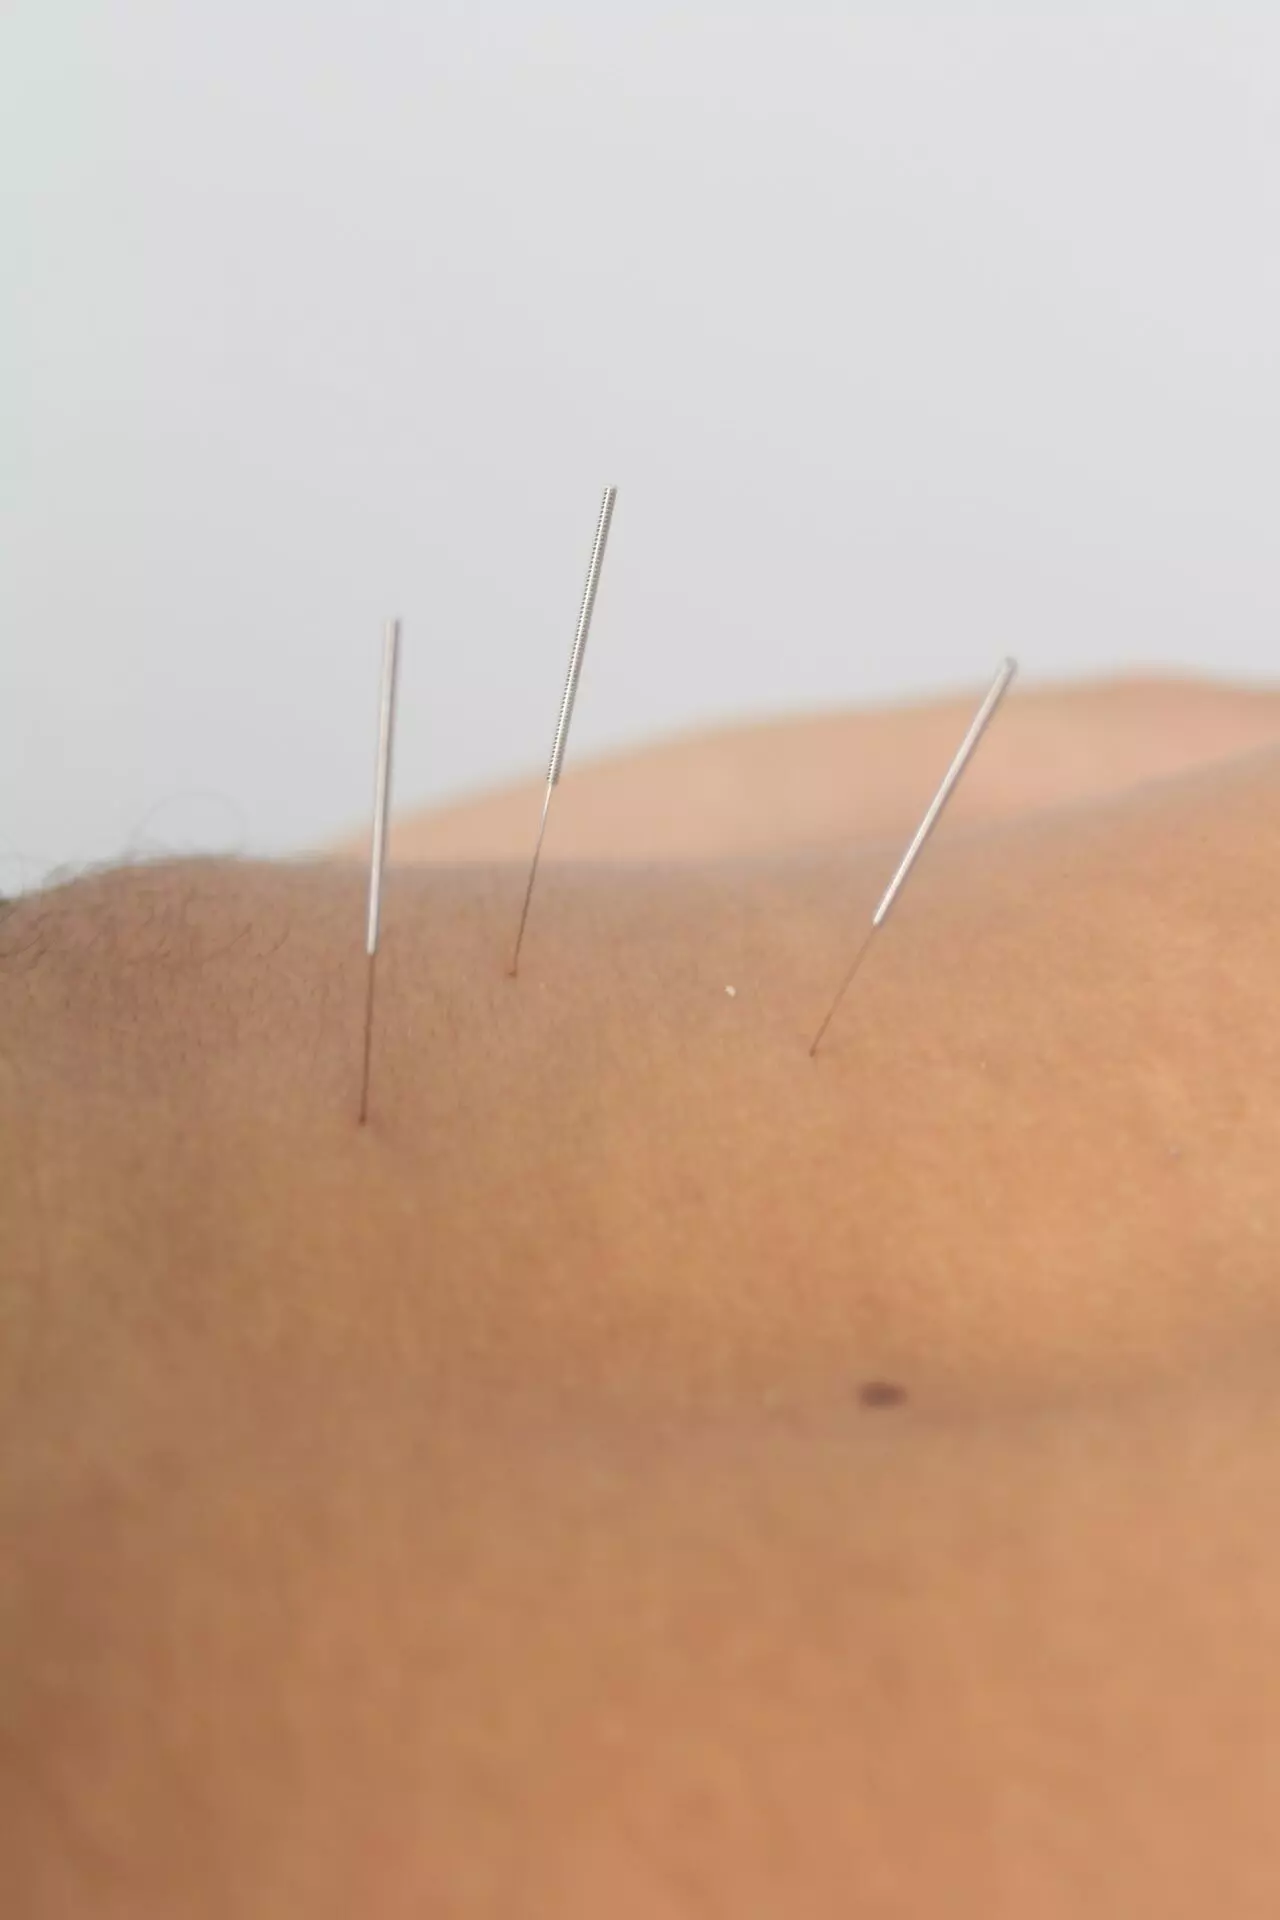 acupuncture in Chania - Physiotherapy and Trigger Point in Chania Crete